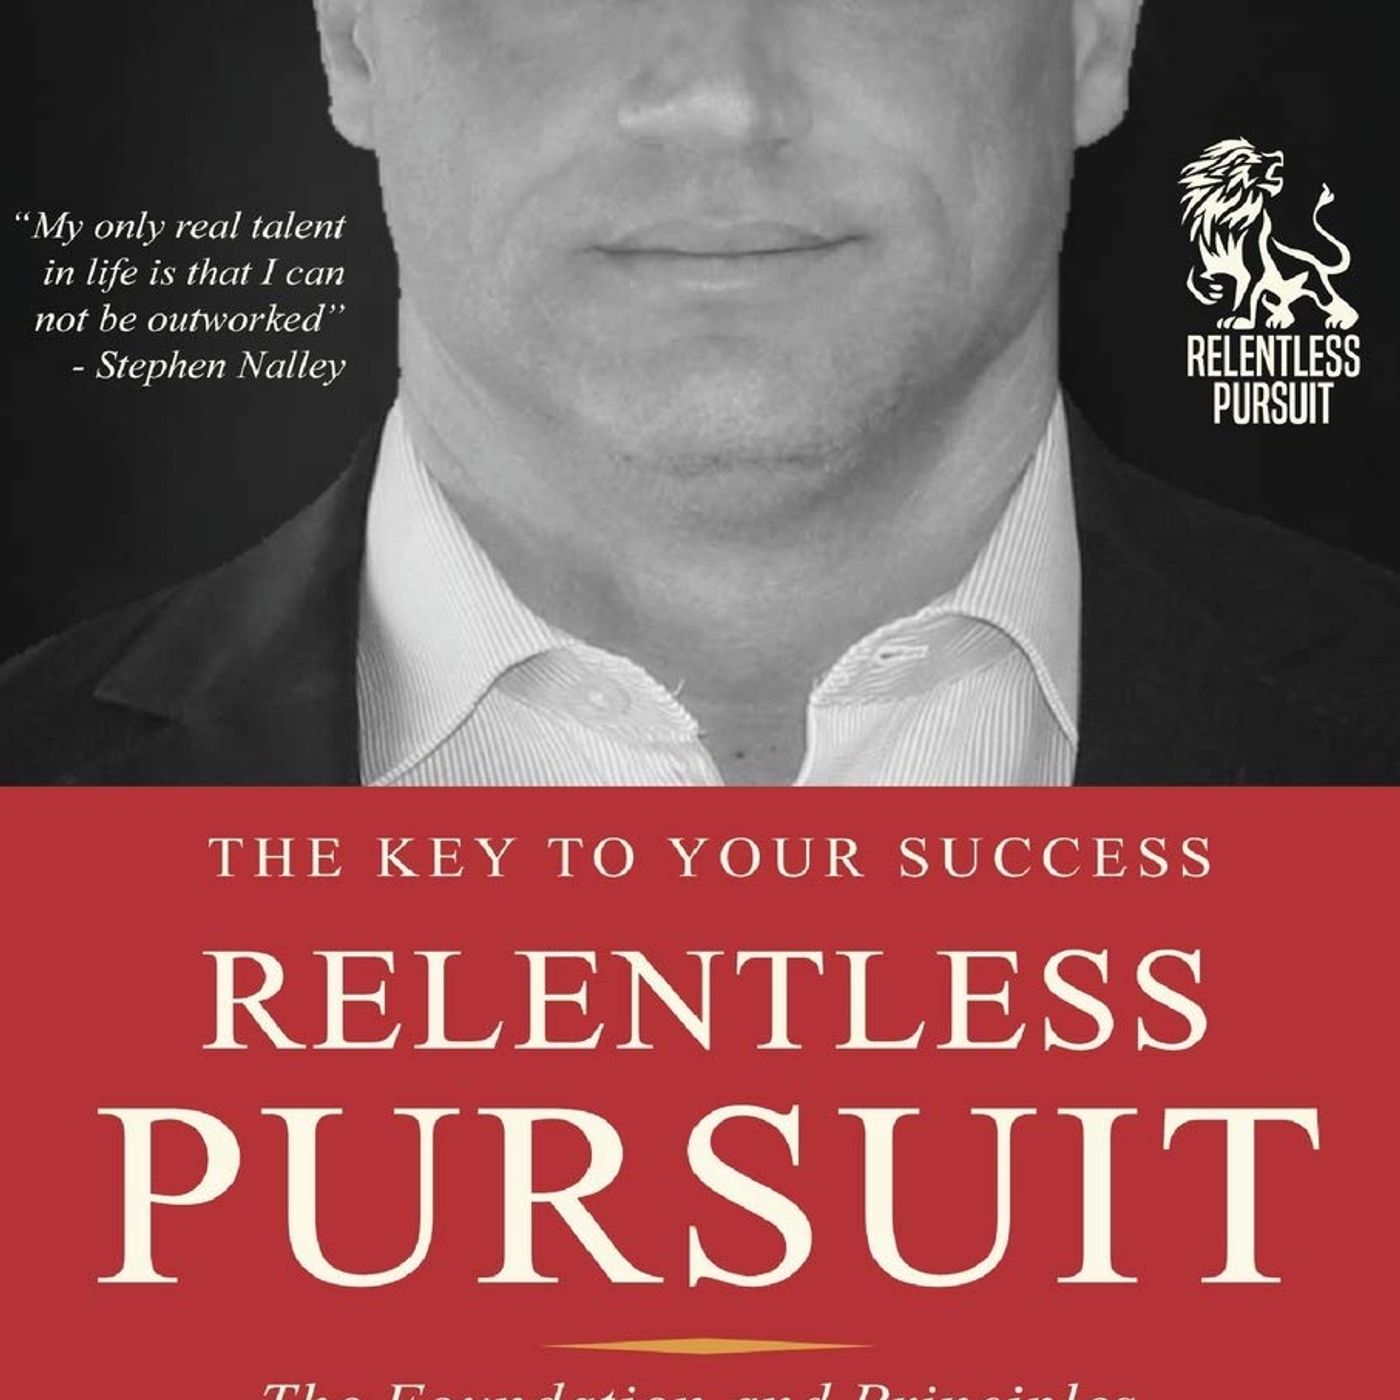 Author Stephen Nalley of "Relentless Pursuit" is my very special guest!